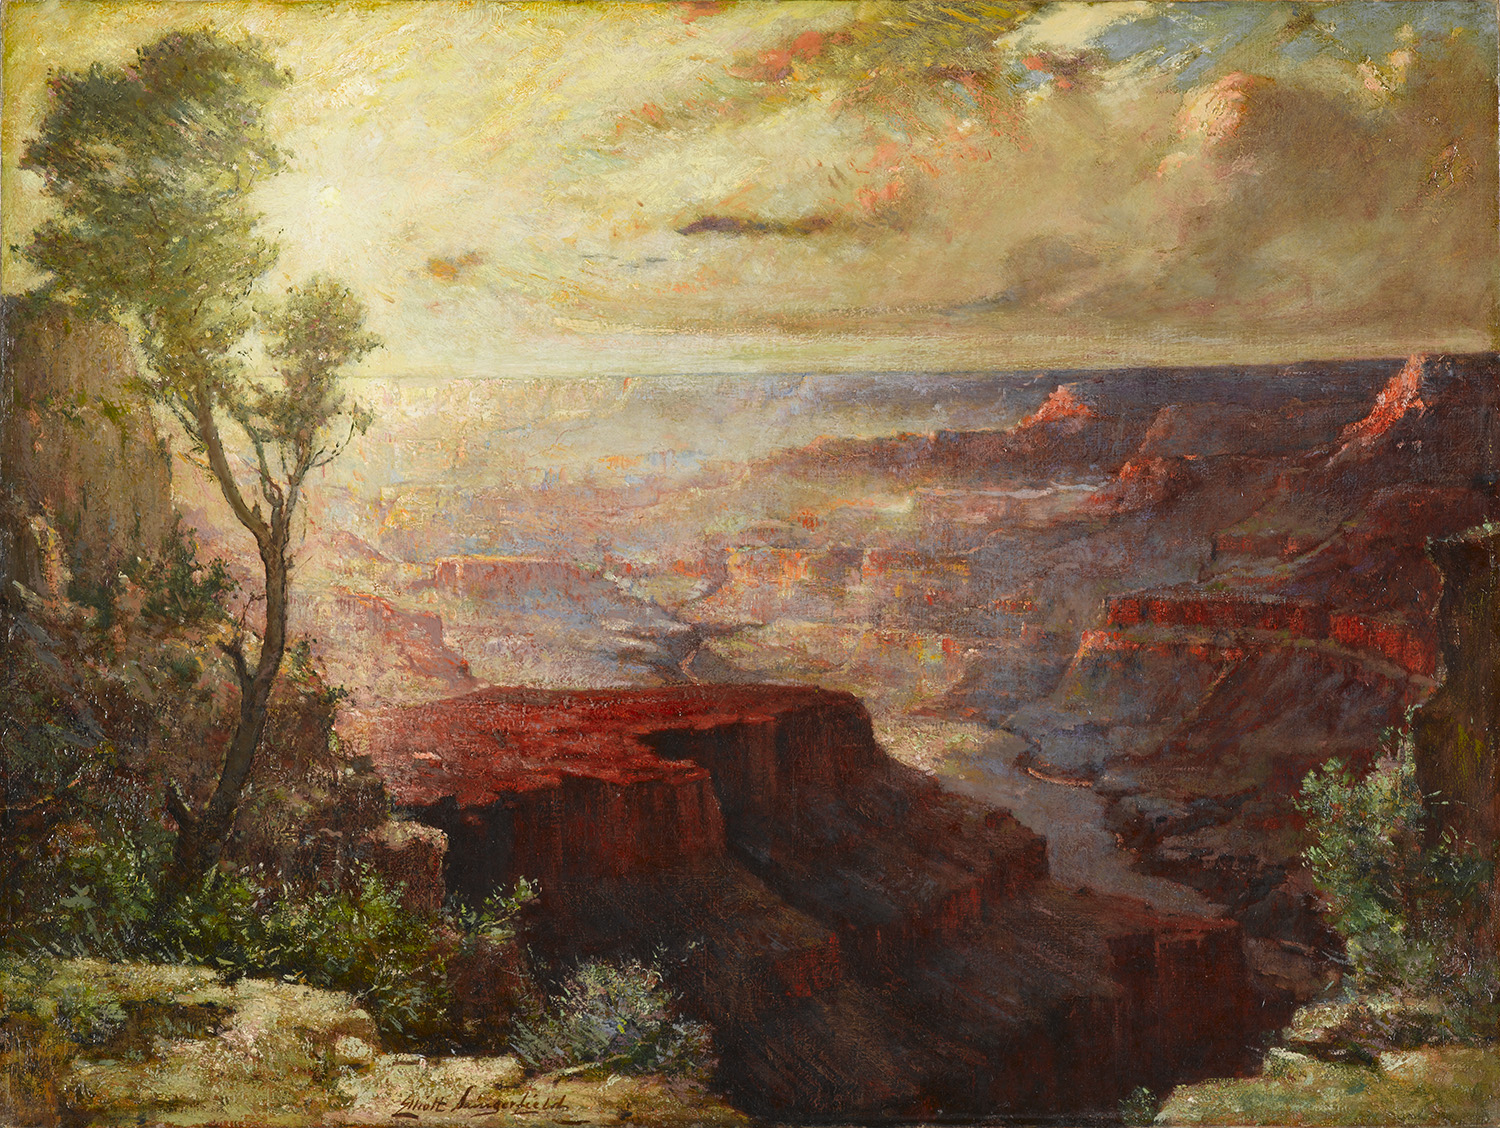  Elliott Daingerfield [American, 1859-1932]  The Grand Canyon , circa 1912, oil on canvas North Carolina Museum of Art, Raleigh Purchased with funds from the State of North Carolina 